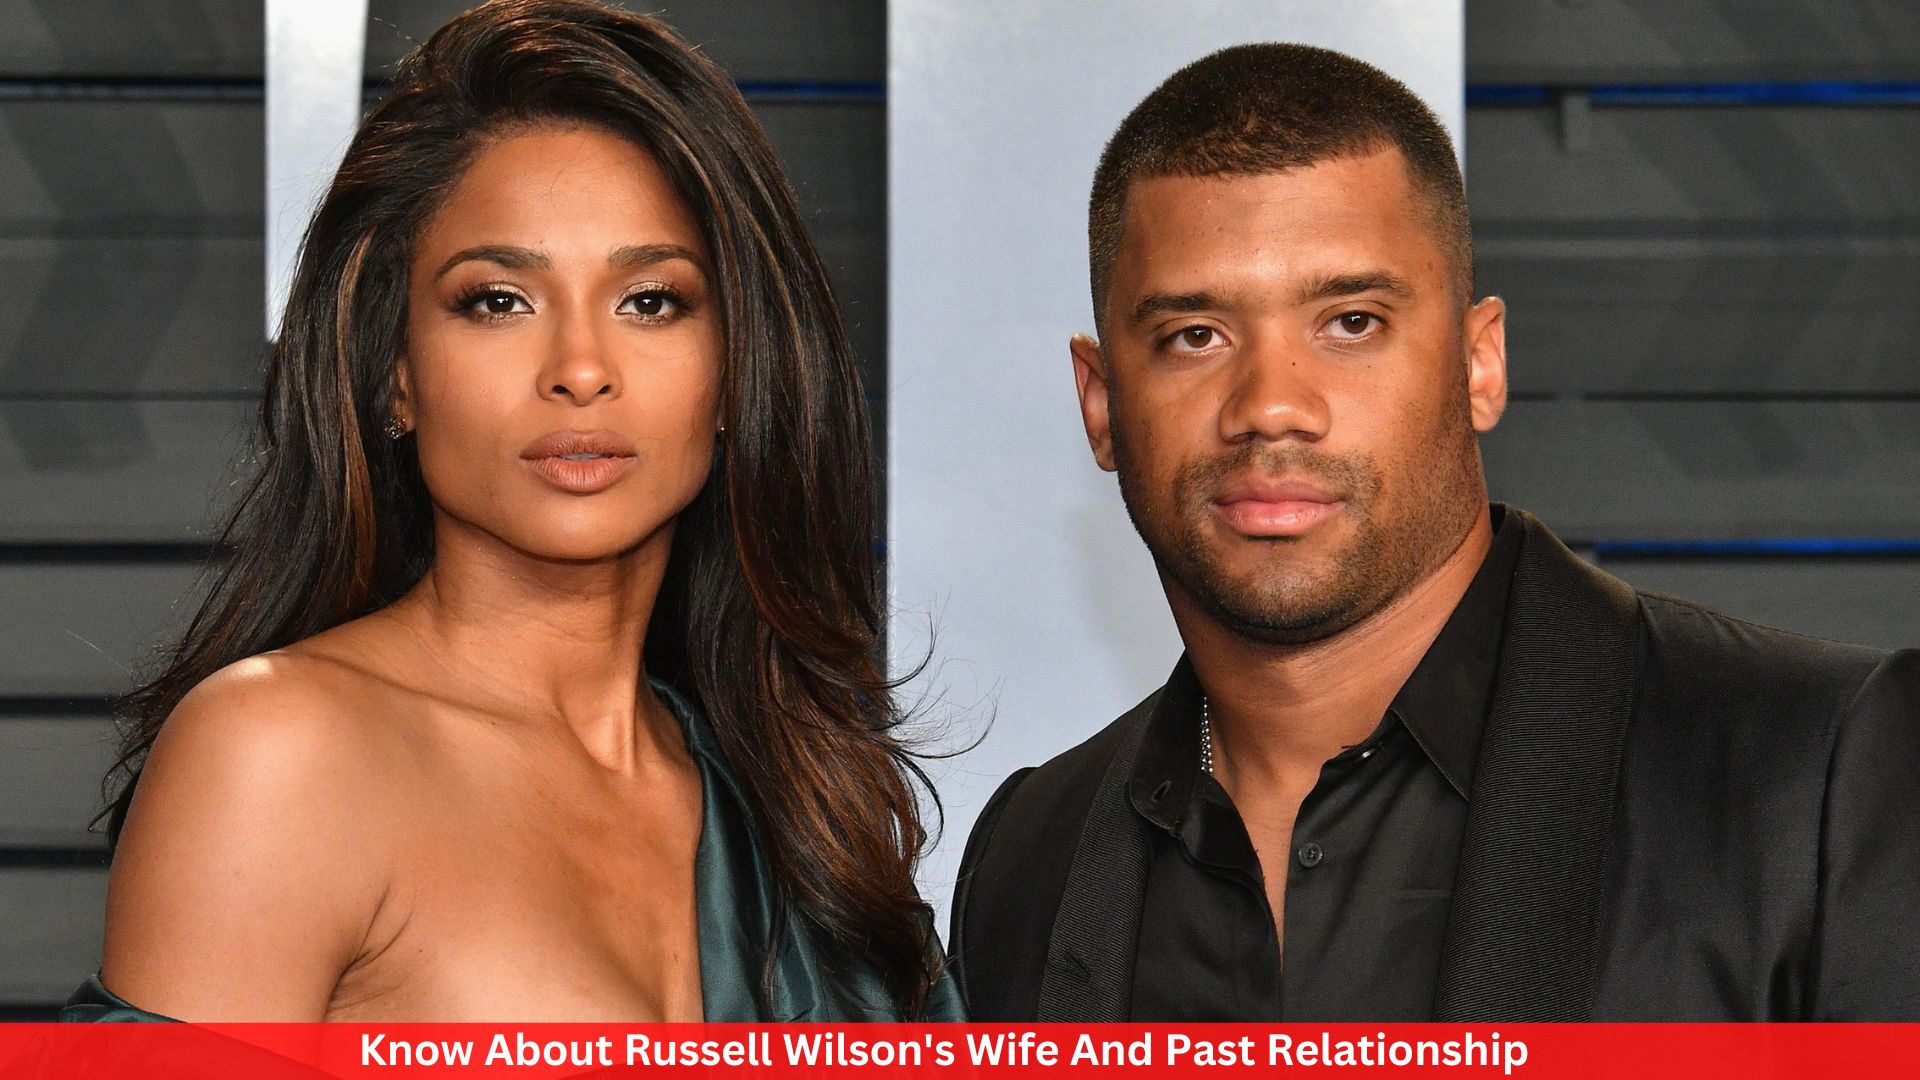 Know About Russell Wilson's Wife And Past Relationship